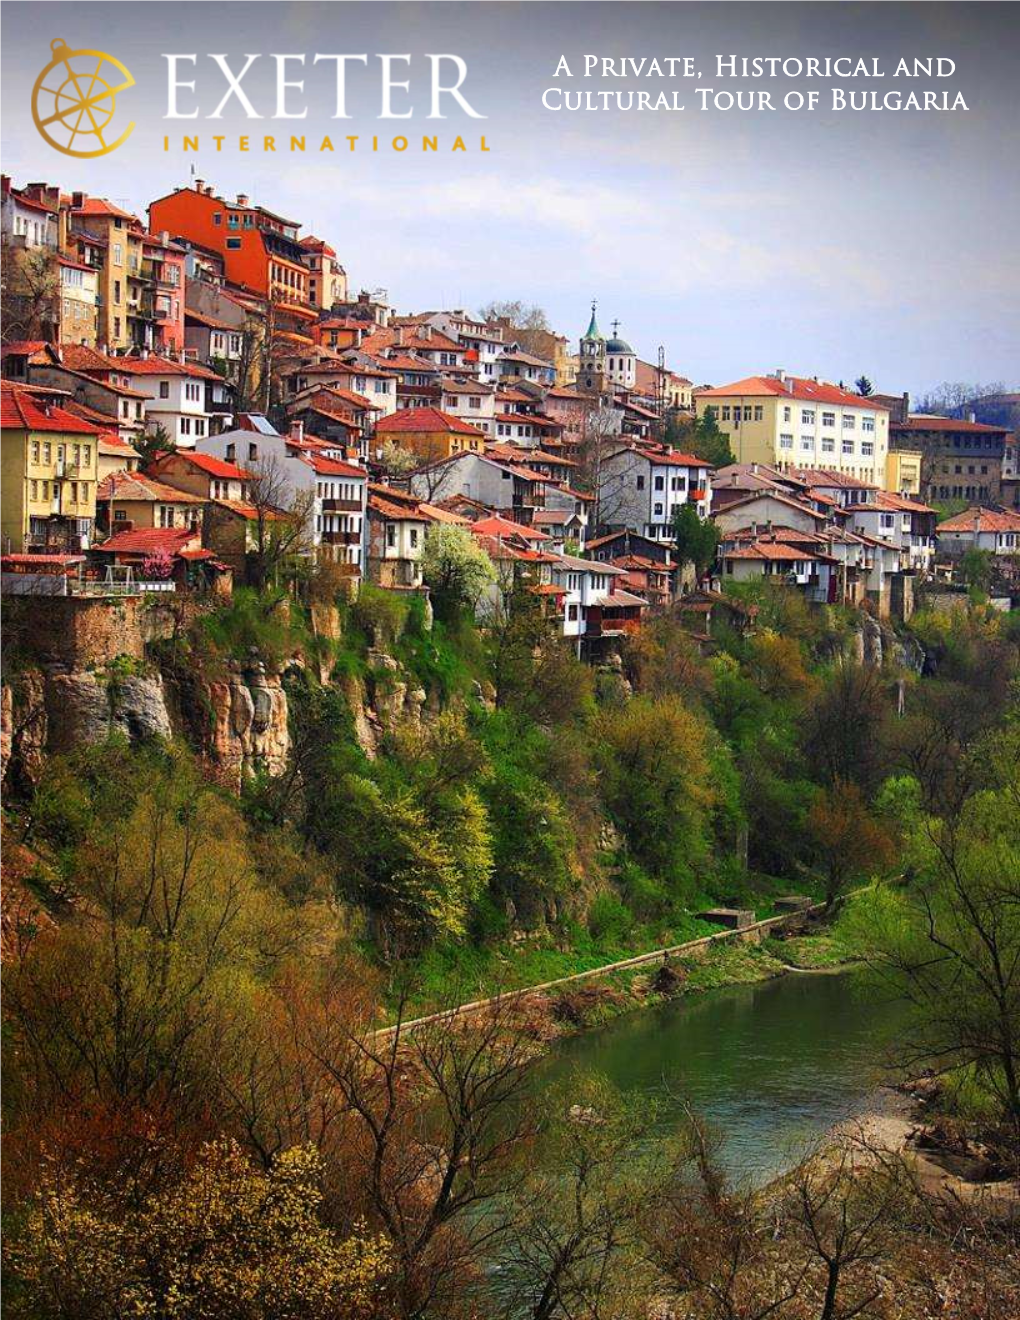 A Private, Historical and Cultural Tour of Bulgaria